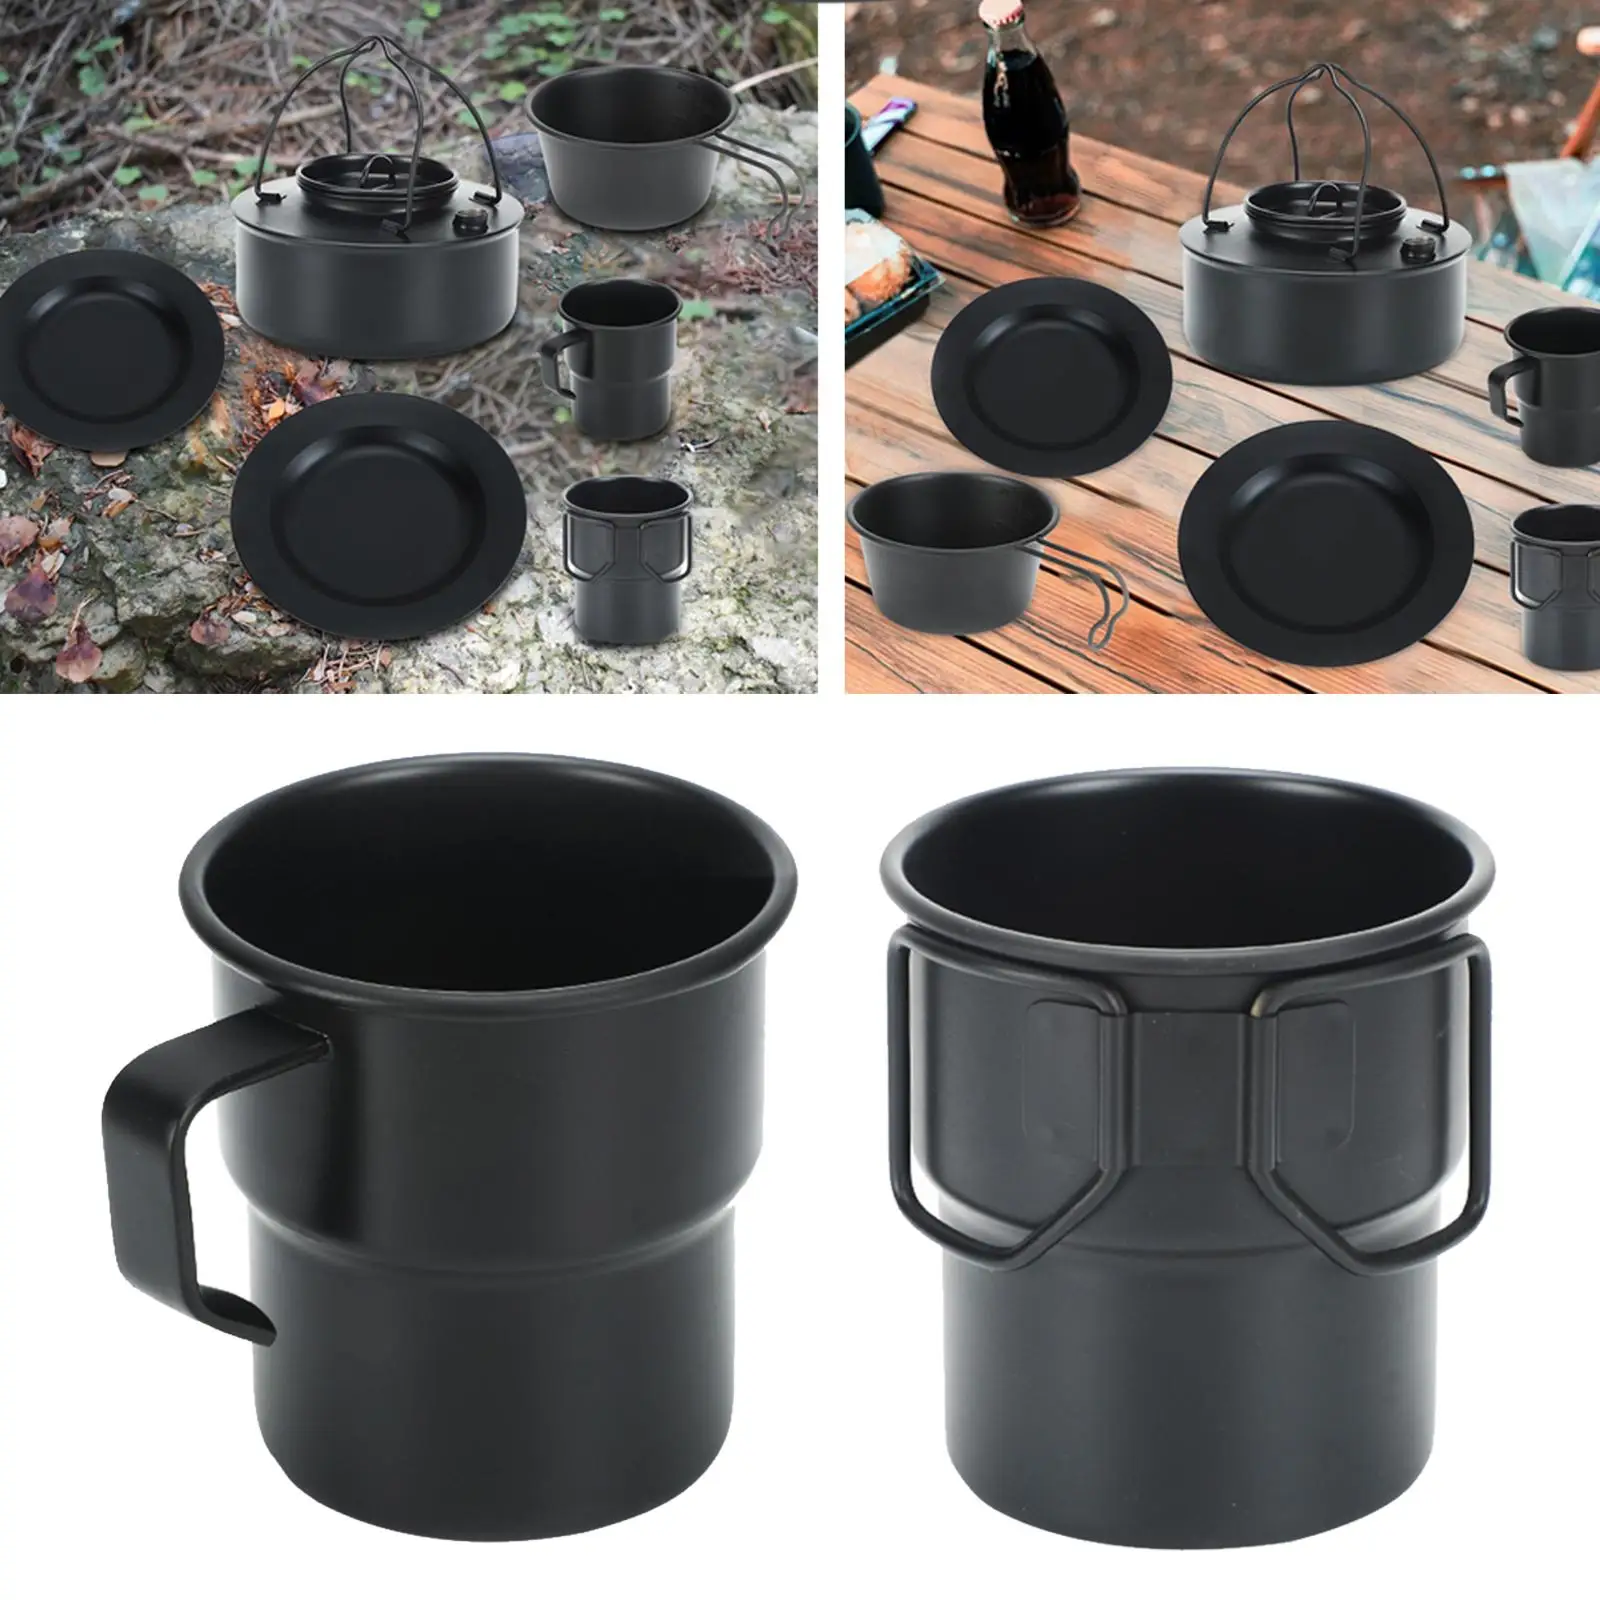 Stainless Steel Camping Cup Cookware 300ml Outdoor Tea Coffee Mug for Picnic